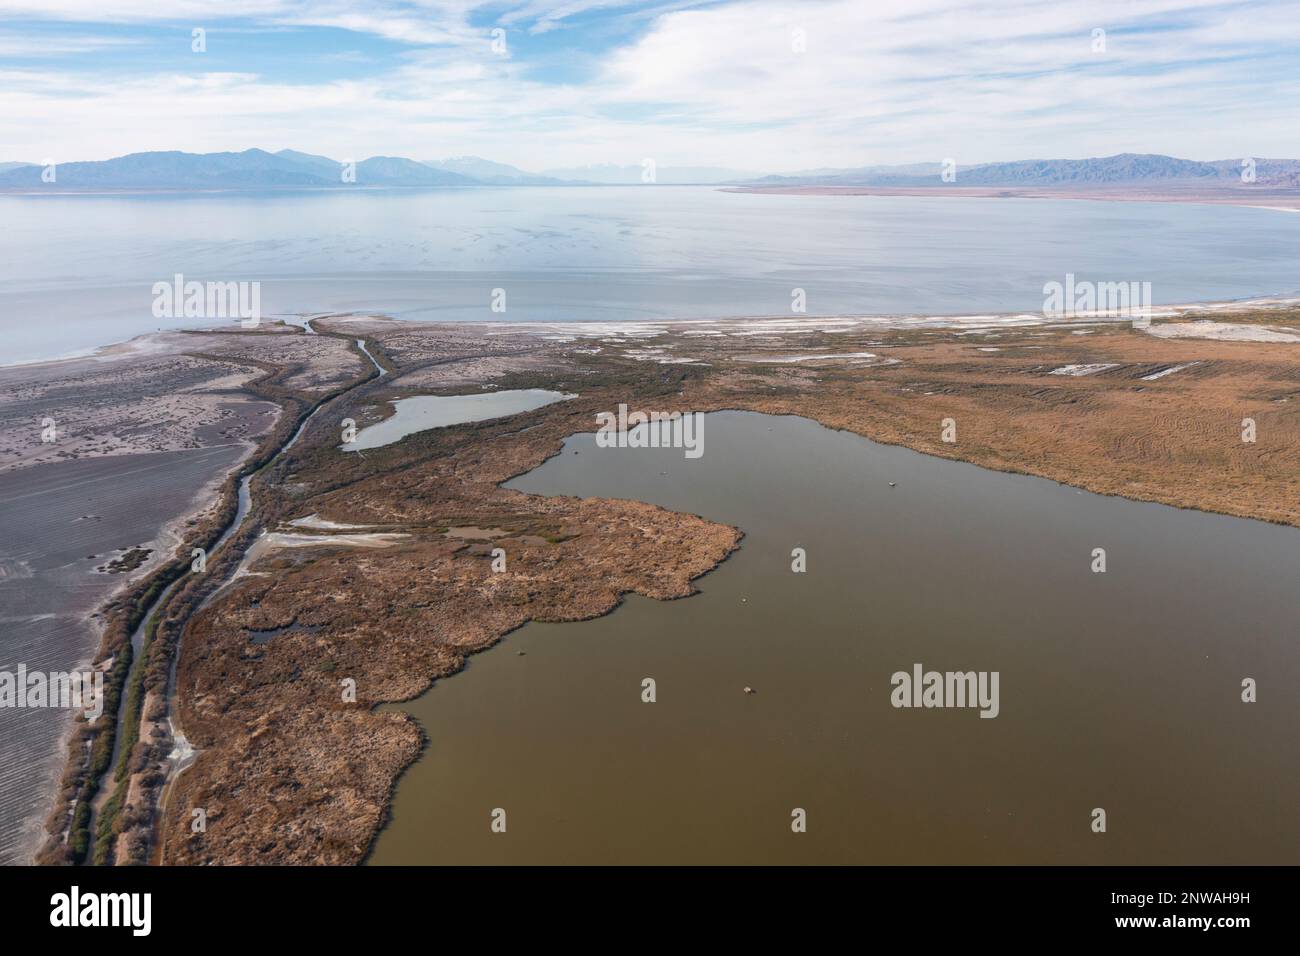 Newly created wetlands attempt to mitigate the environmental crisis playing out at the Salton Sea, a rapidly shrinking lake in the California desert. Stock Photo